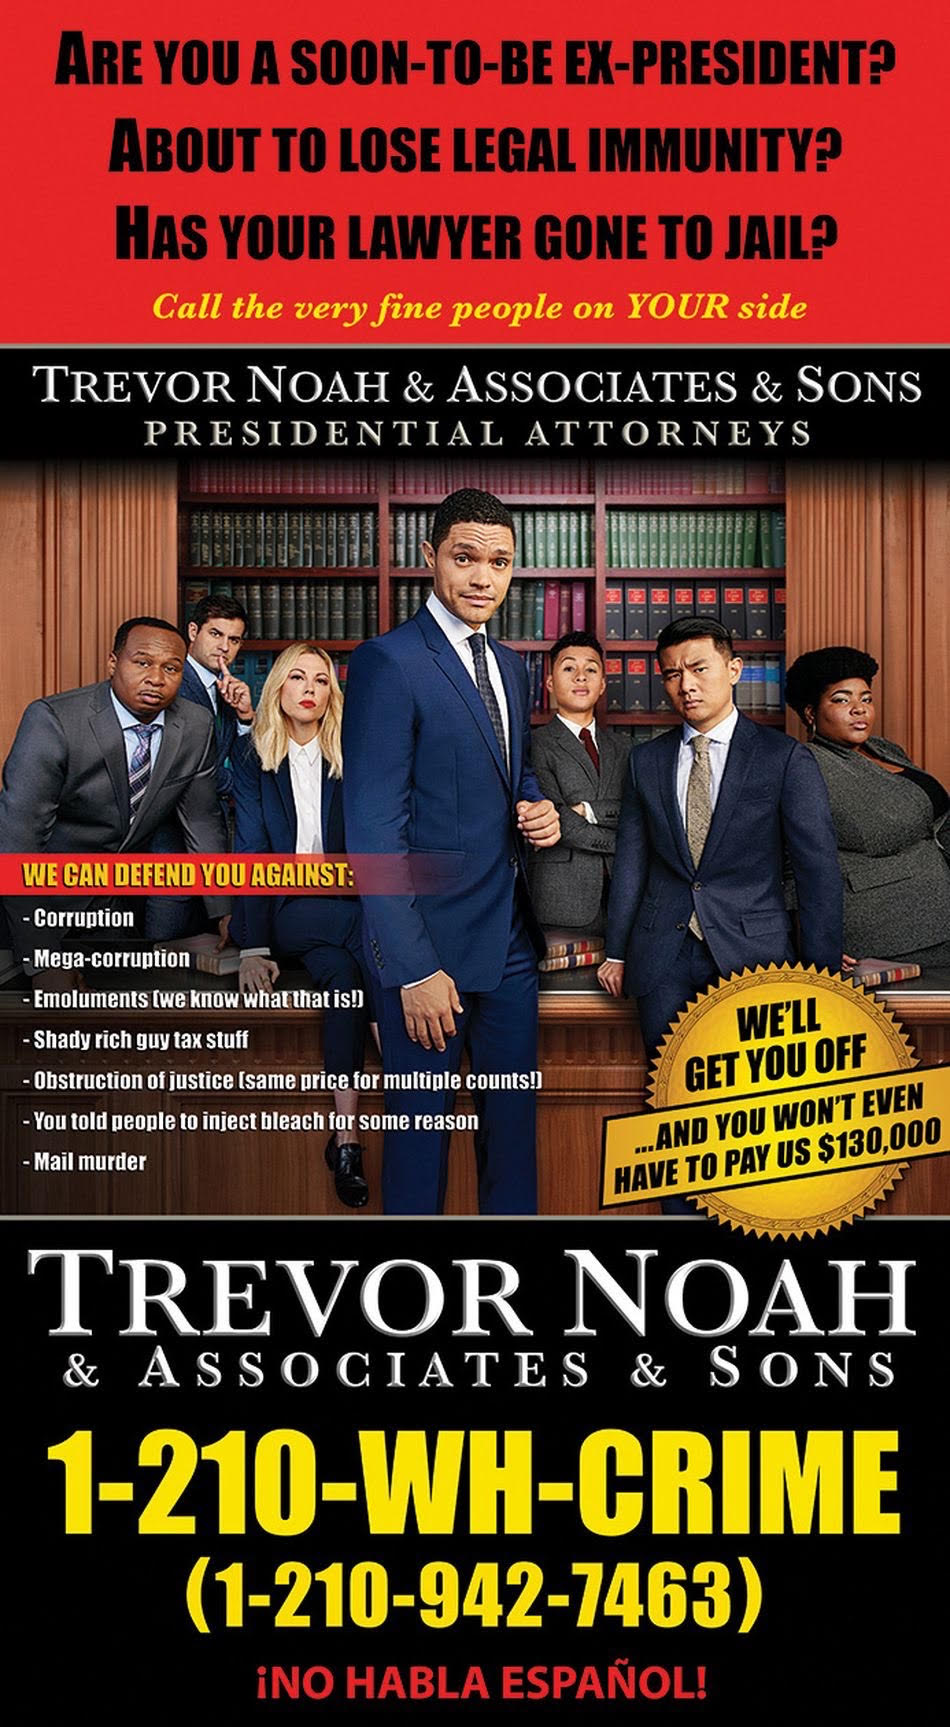 Trevor Noah The Daily Show bought full page ads troll President Trump New York Times NYT Washington Post WAPO Los Angeles Times